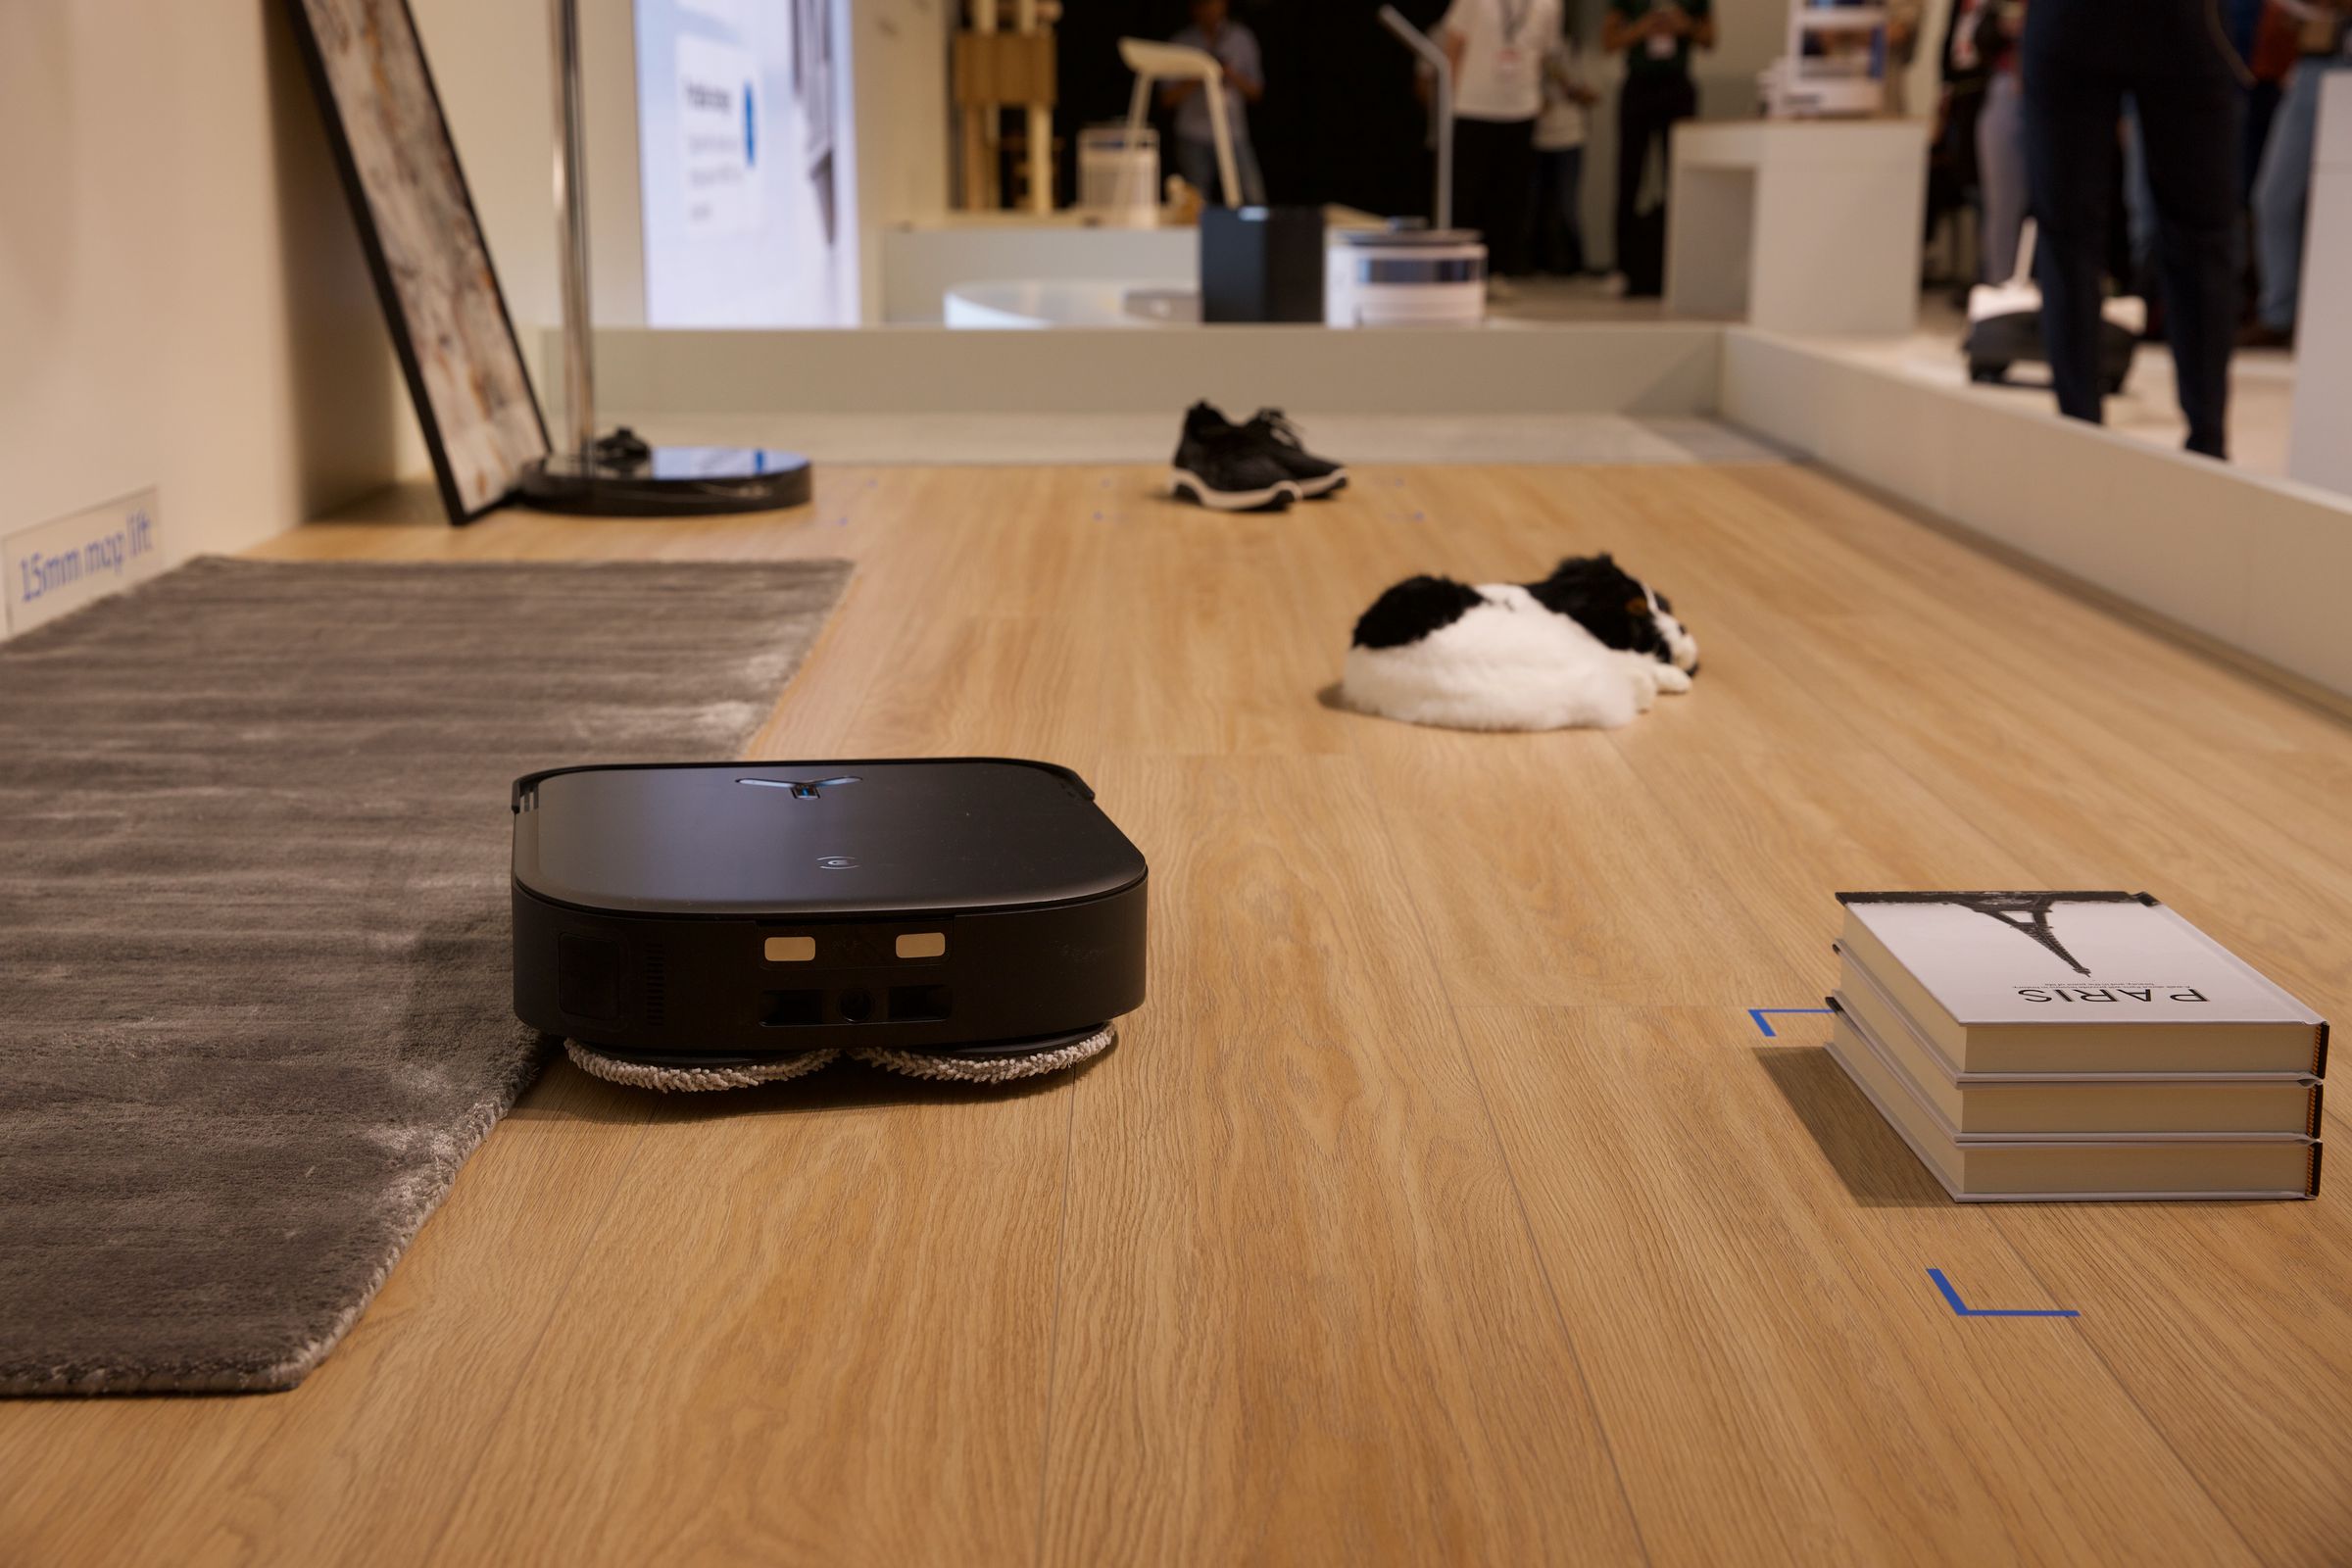 The Deebot X2 Omni — the latest robot vacuum mop from Ecovacs — is on display at IFA 2023 this week.